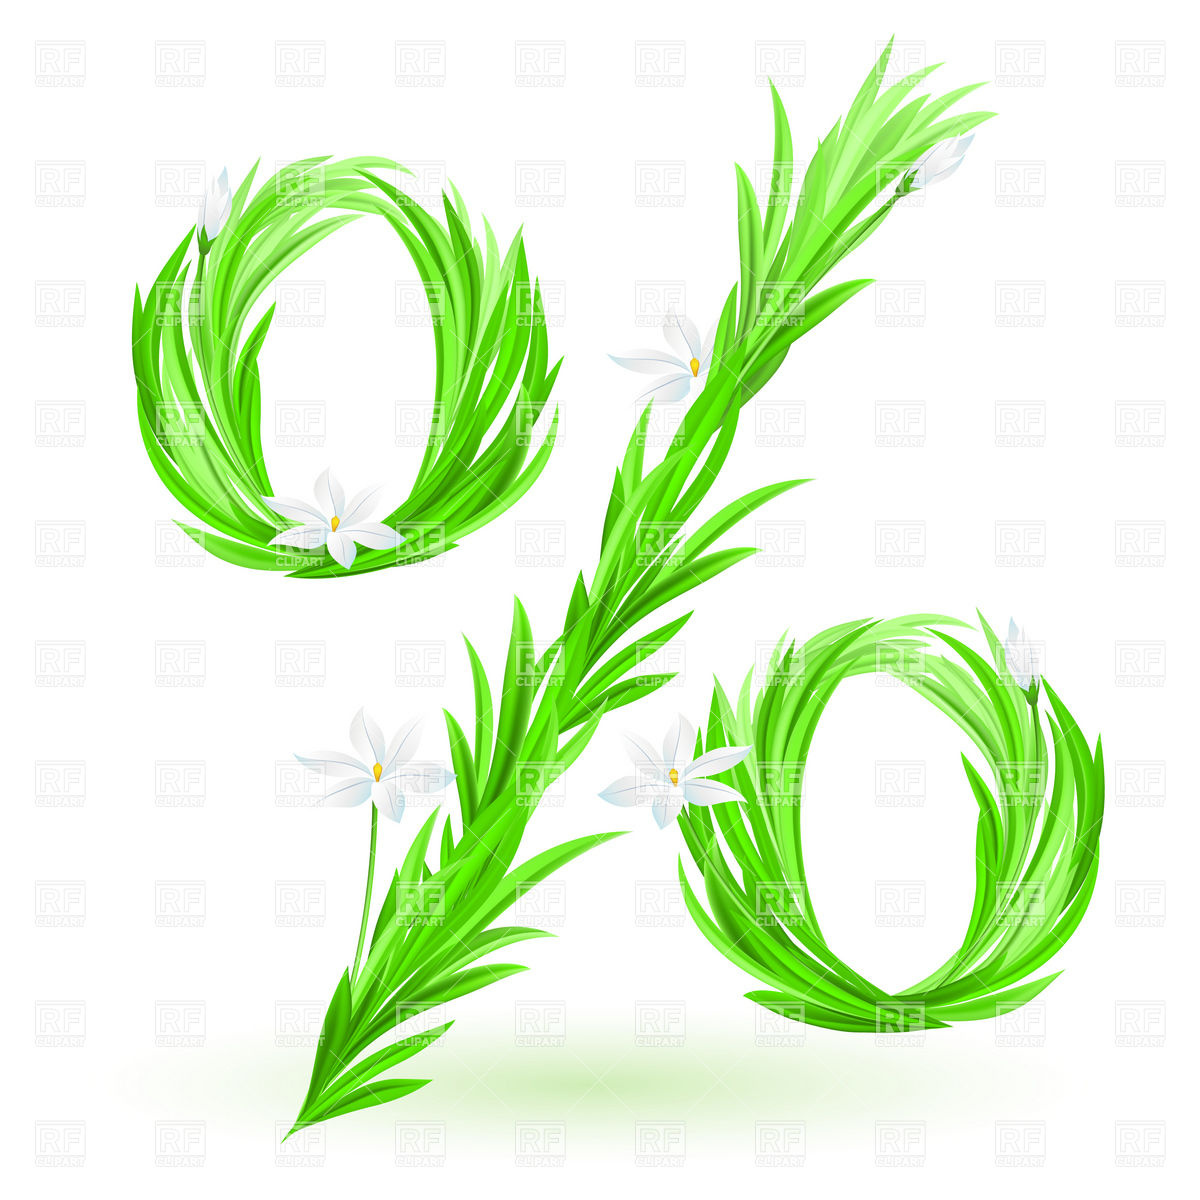 Spring Flowers and Grass Clip Art